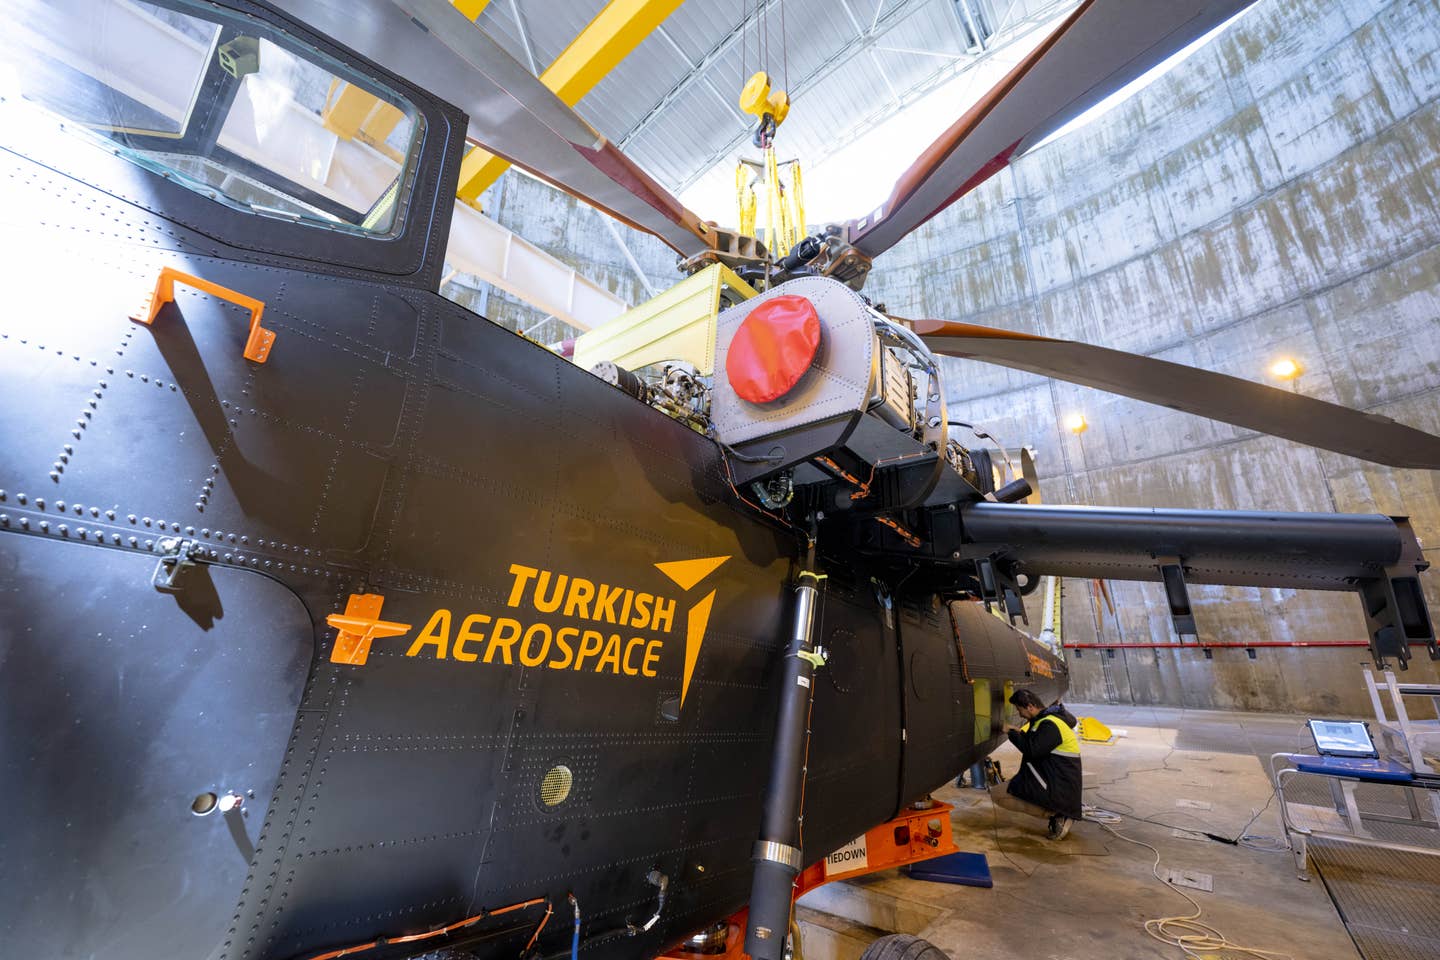 Engineers work on the T929 in the engine test facility in Ankara. <em>Photo by Aytac Unal/Anadolu Agency via Getty Images</em>